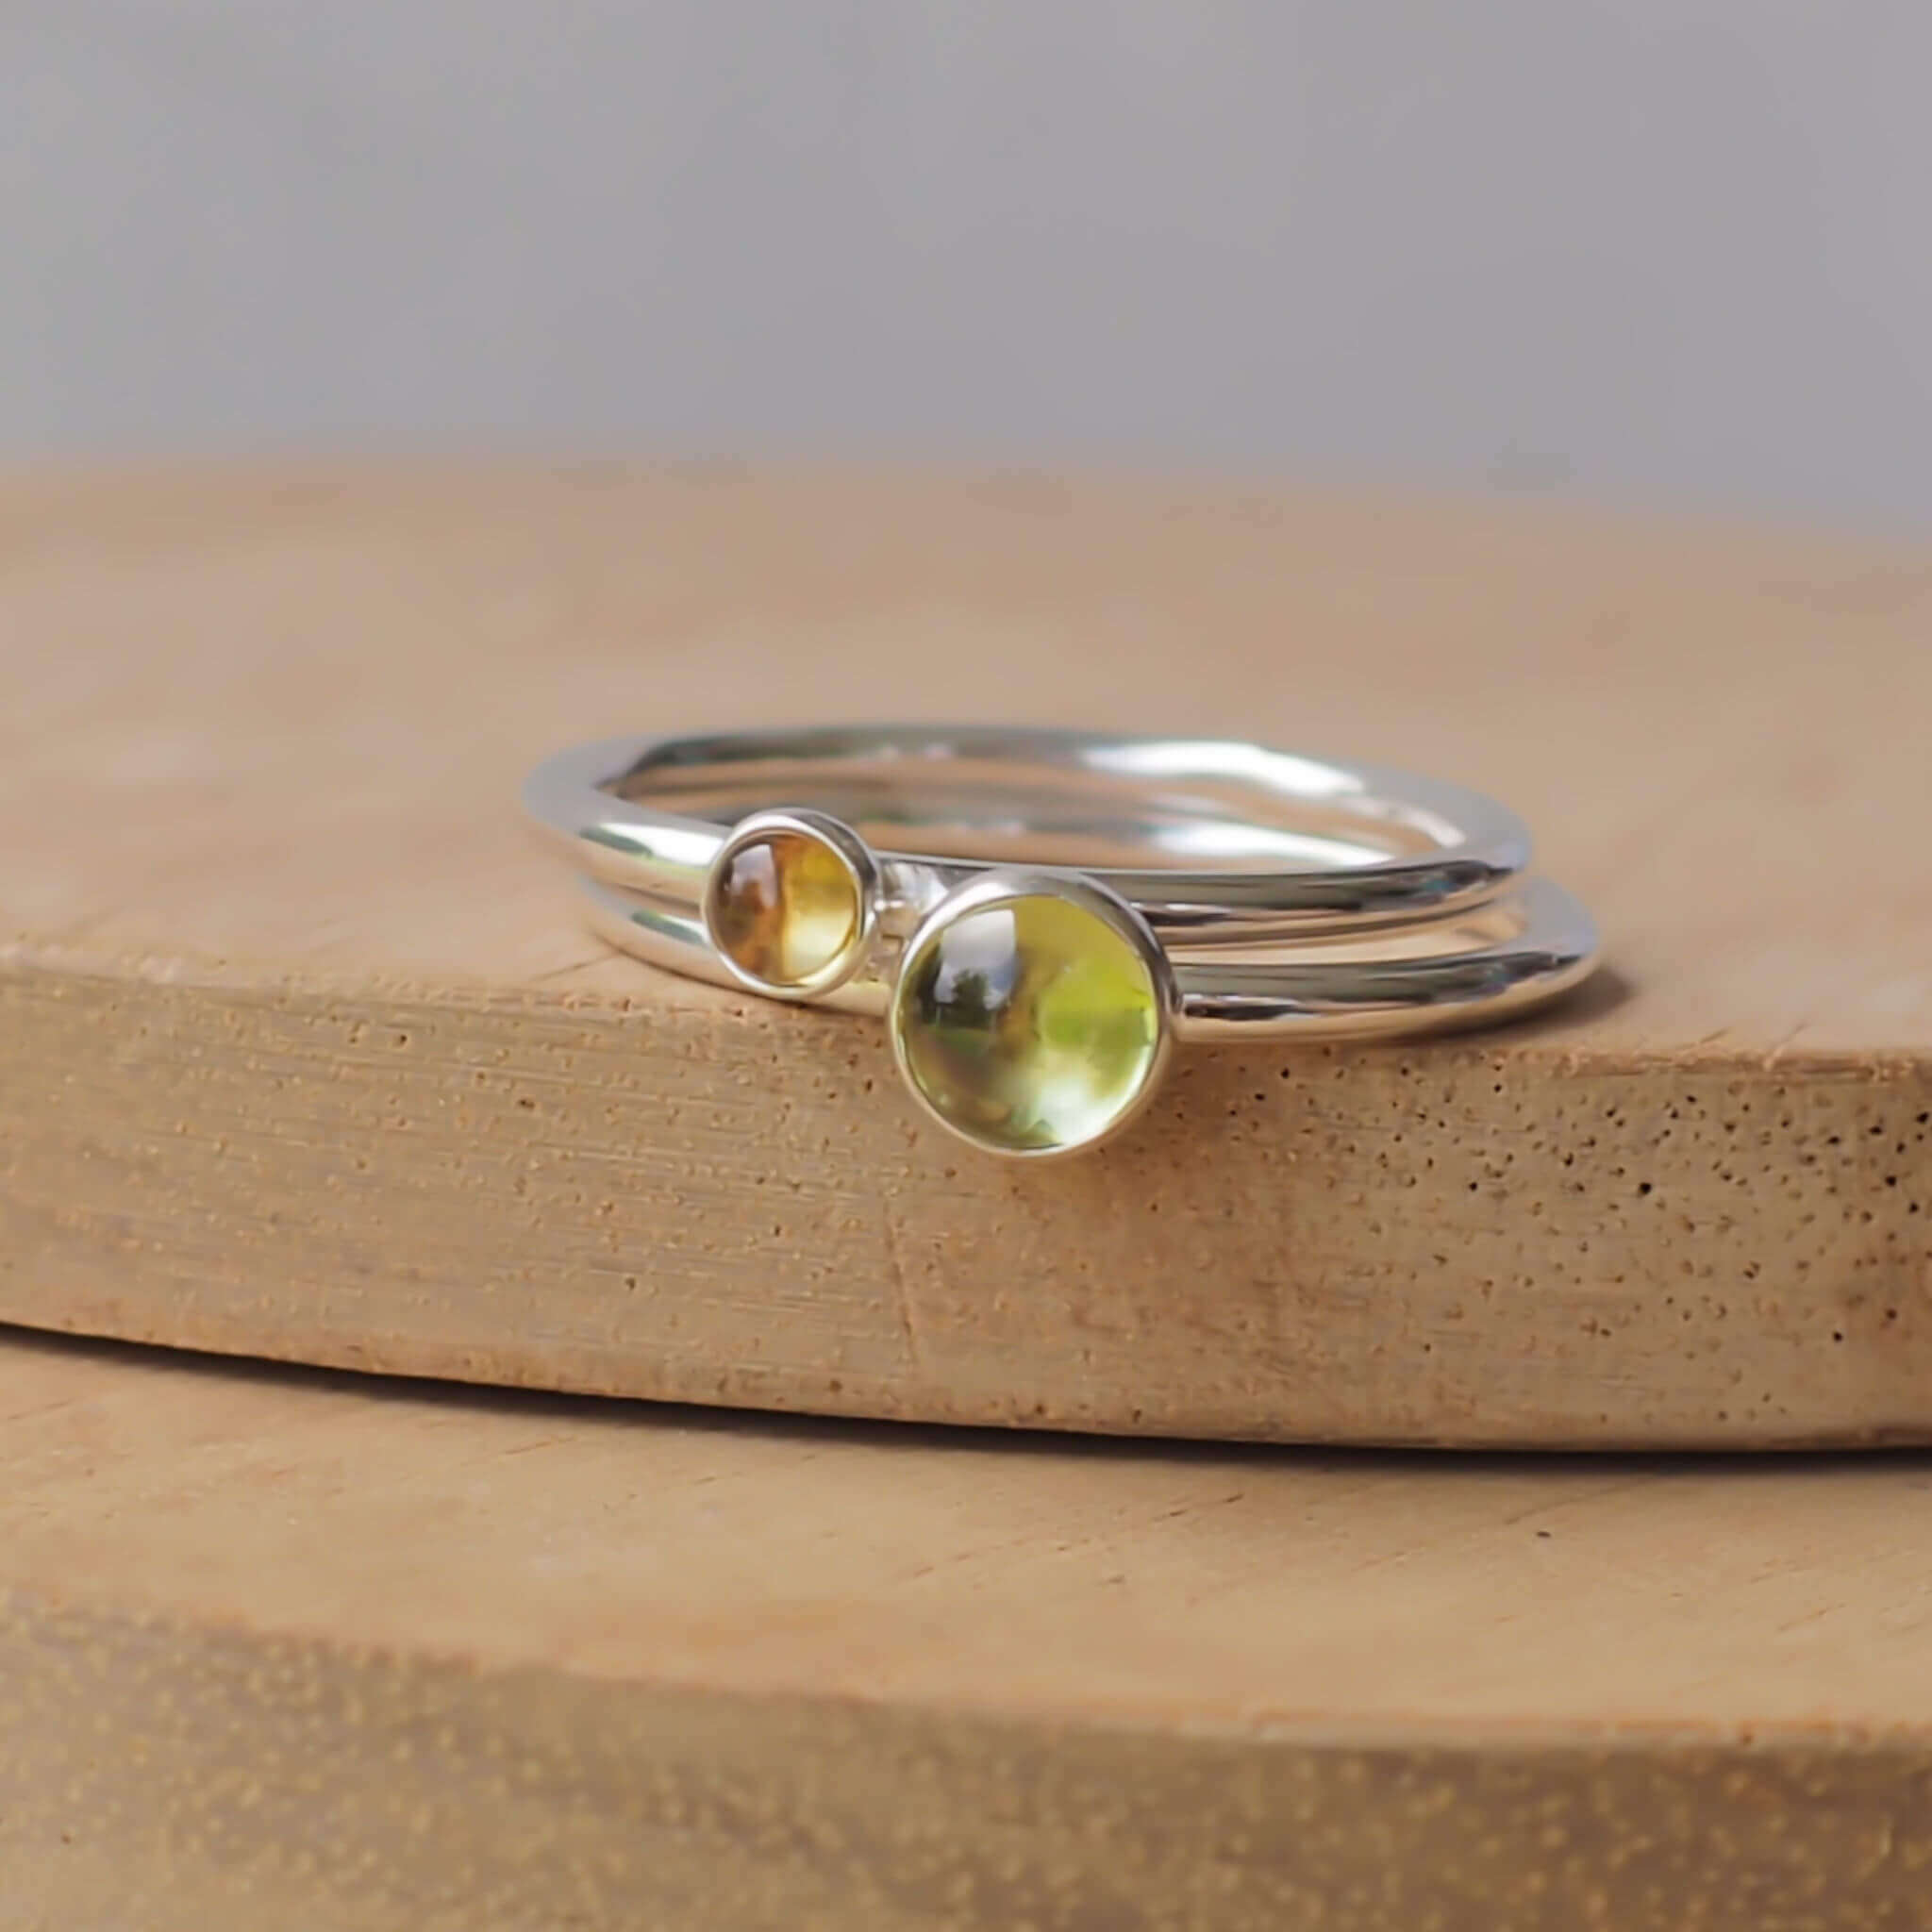 Two silver ring set with round stones. Simple round bands with a 5mm green Peridot and a 3mm yellow Citrine, birthstones for August and November. Rings are pictured on wood background. Handmade by Maram Jewellery in Scotland